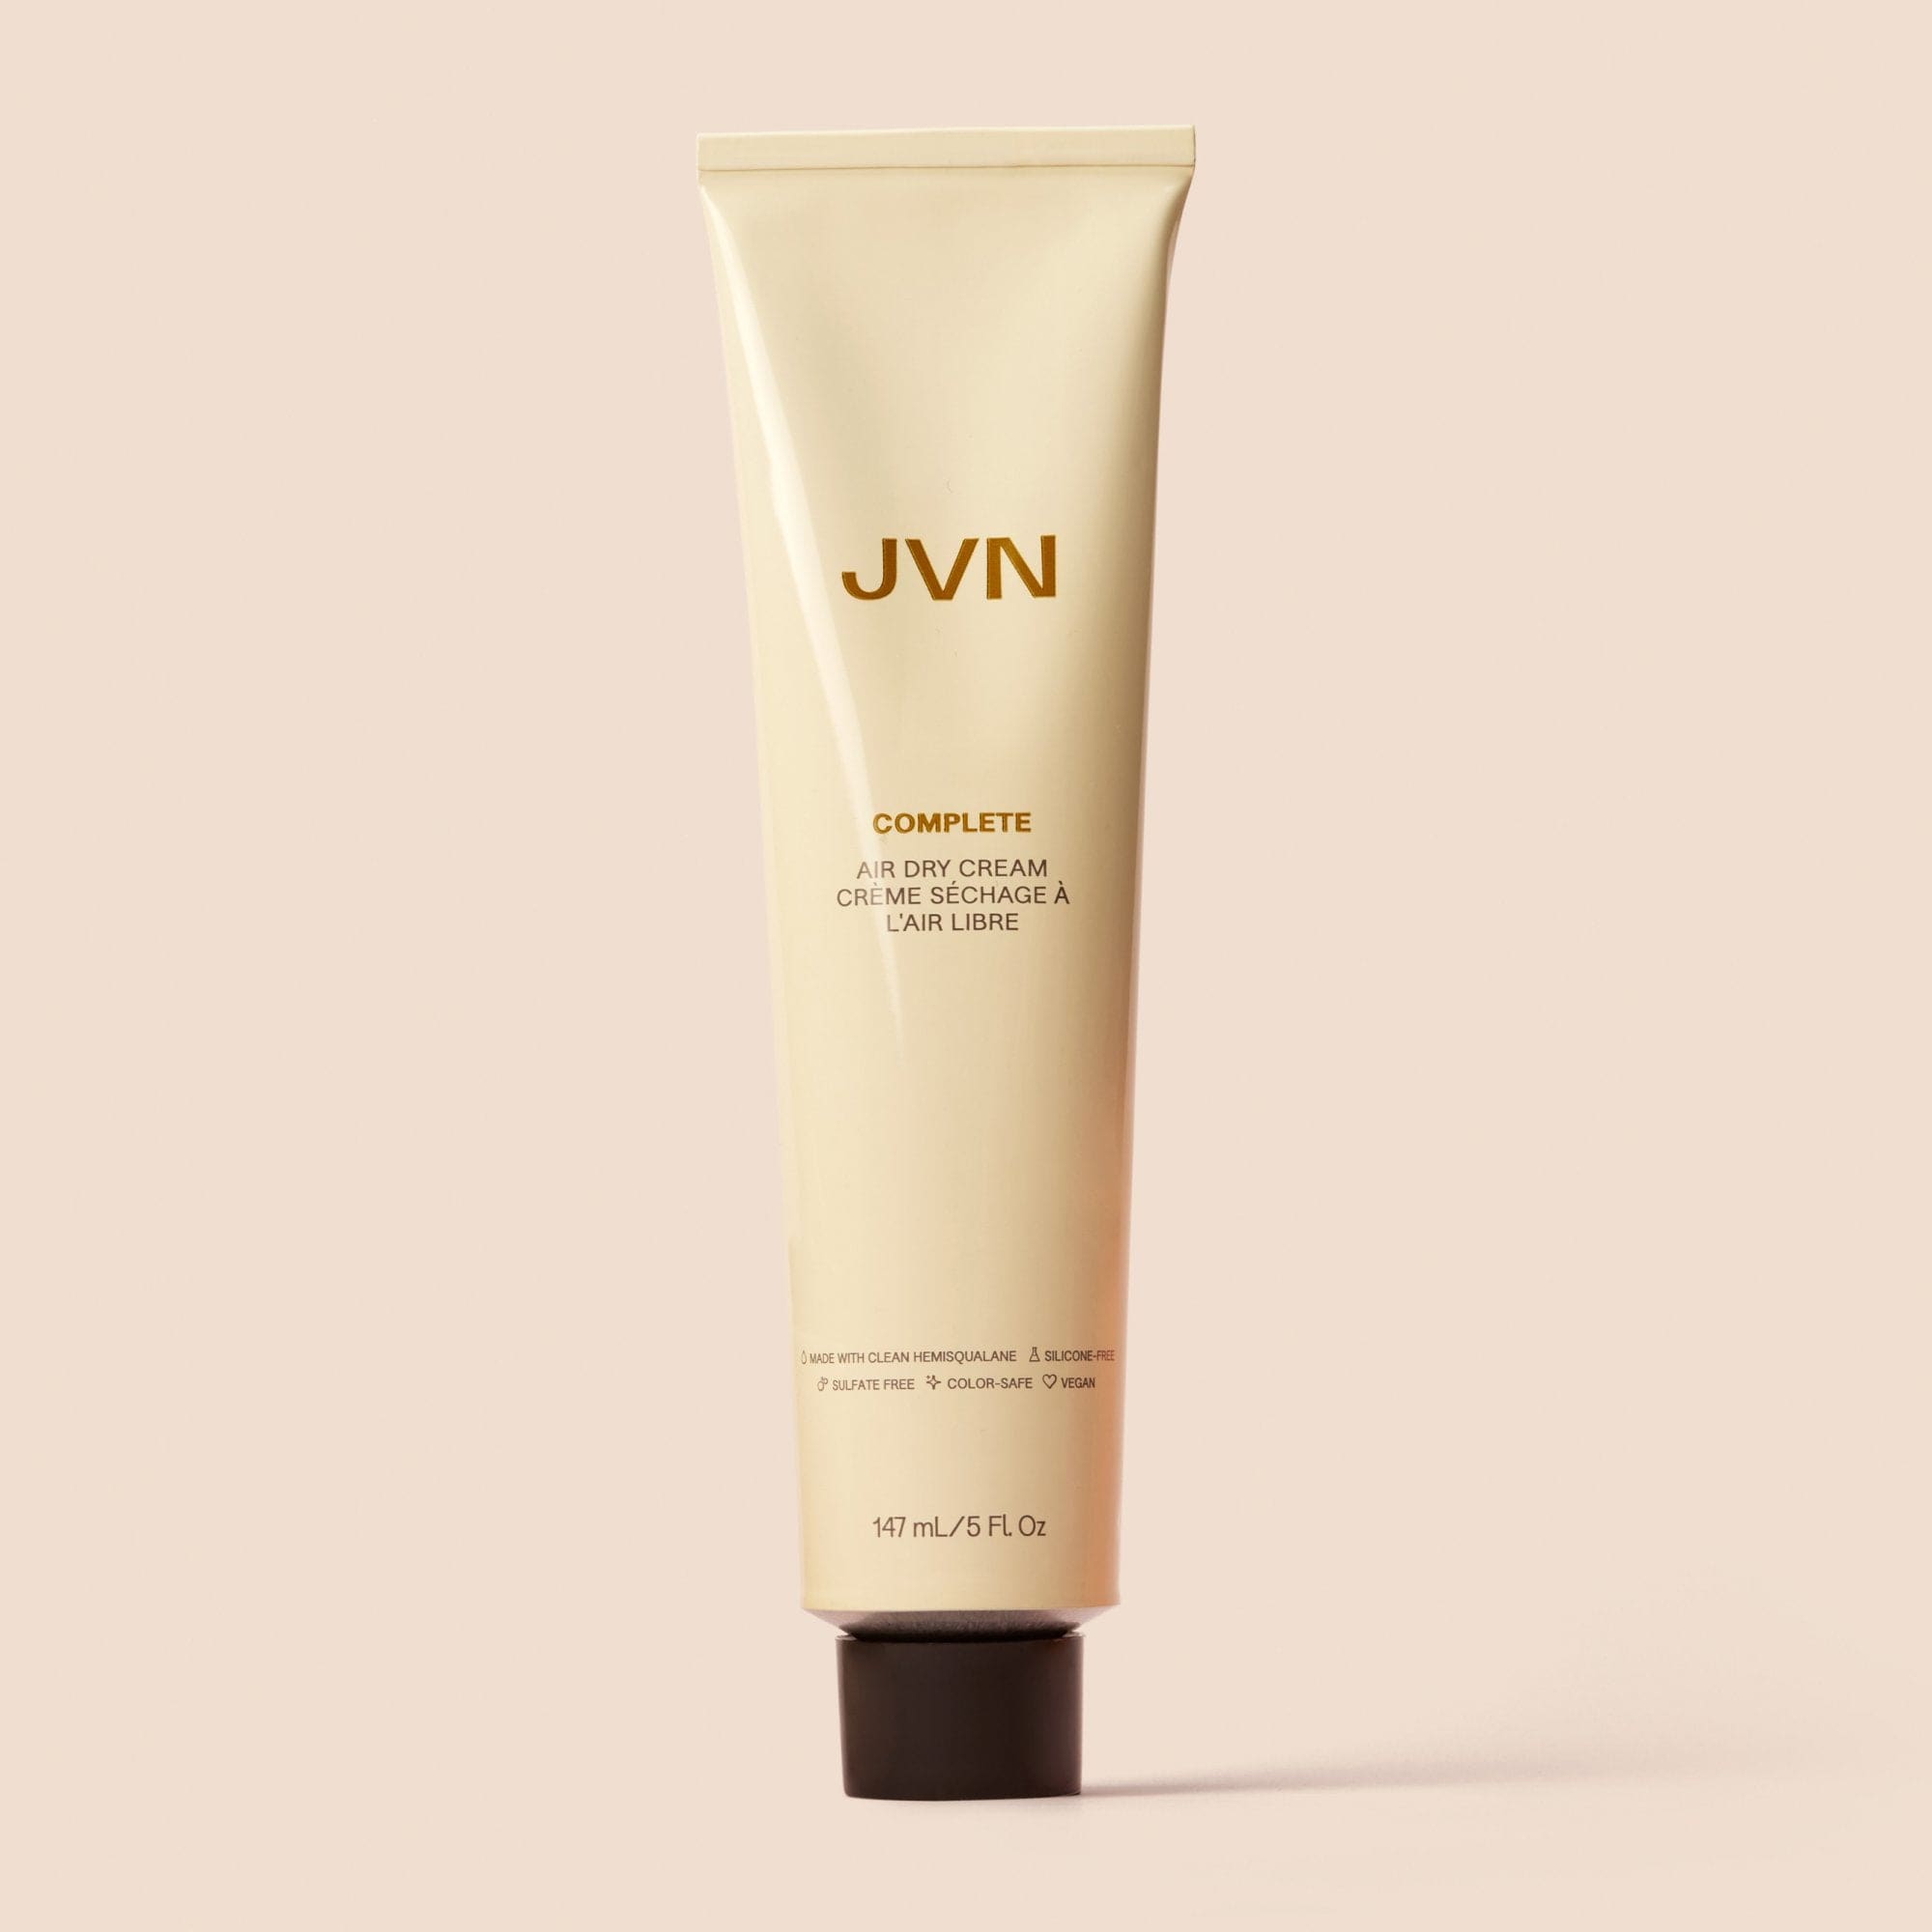 JVN Styler Complete Air Dry Cream Complete Air Dry Cream | Styling Cream For Curly & Wavy Hair | JVN sulfate-free silicone-free sustainable